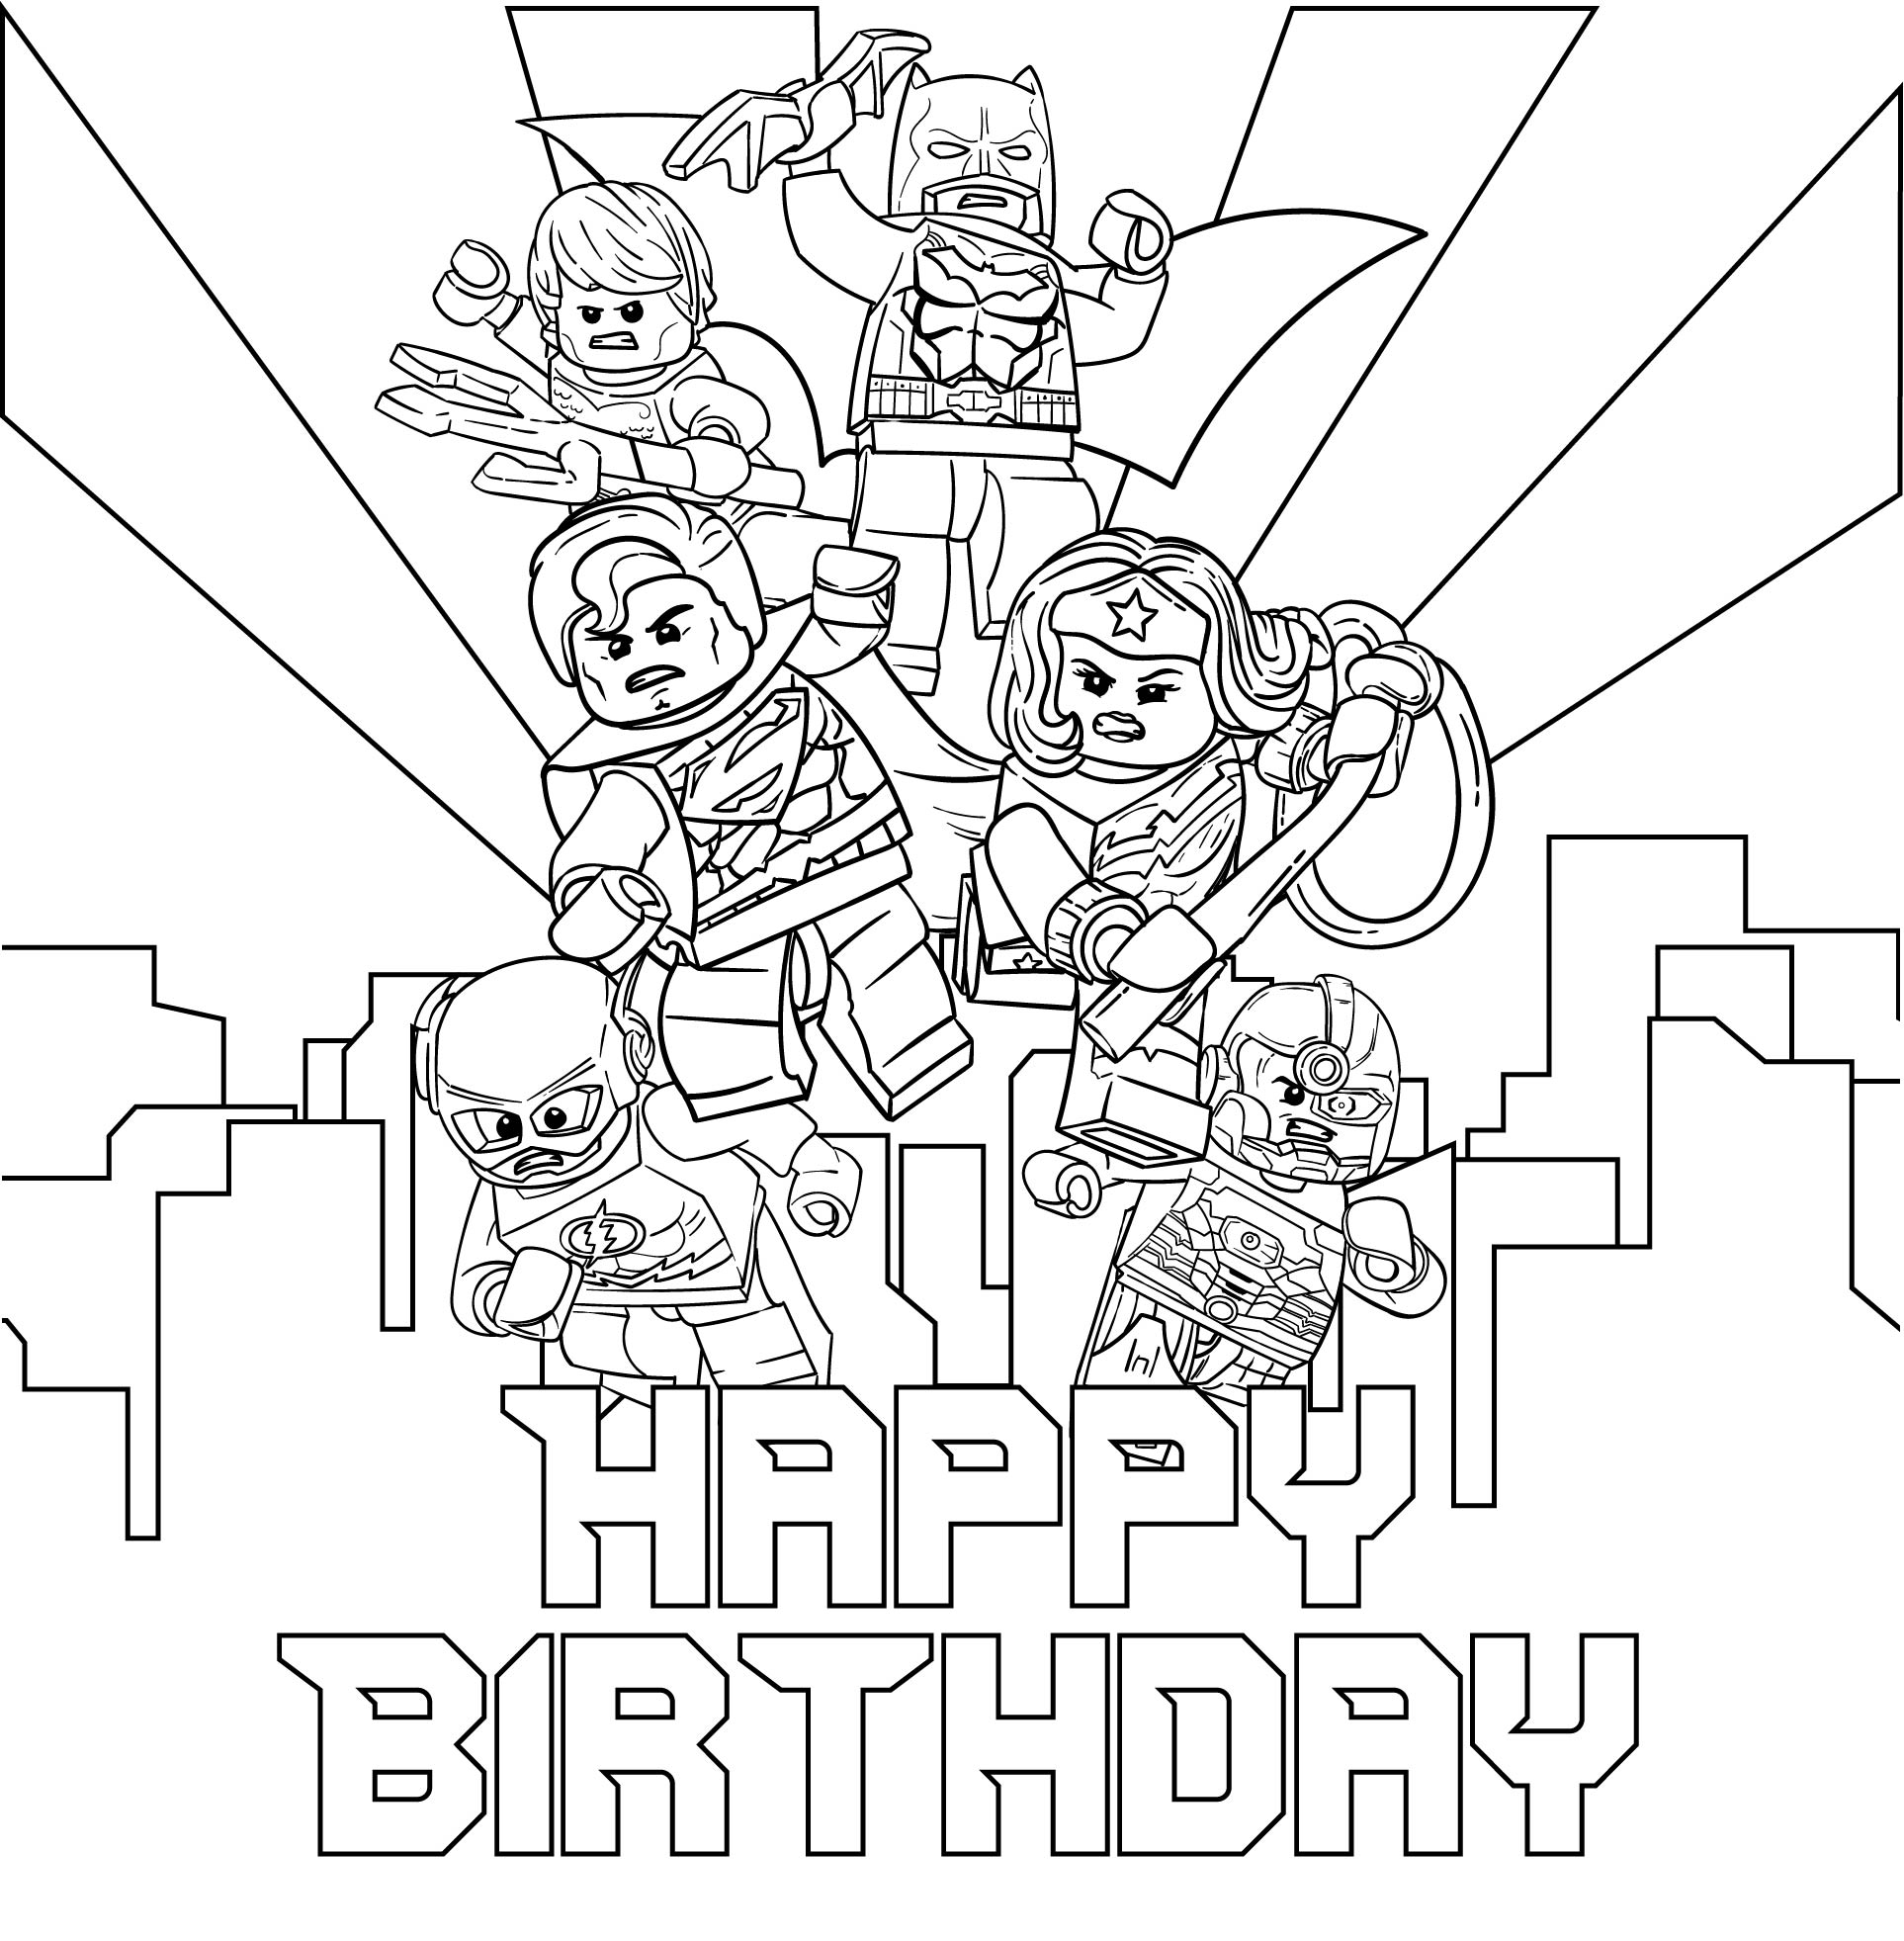 7-best-images-of-lego-birthday-printable-cards-to-color-lego-star